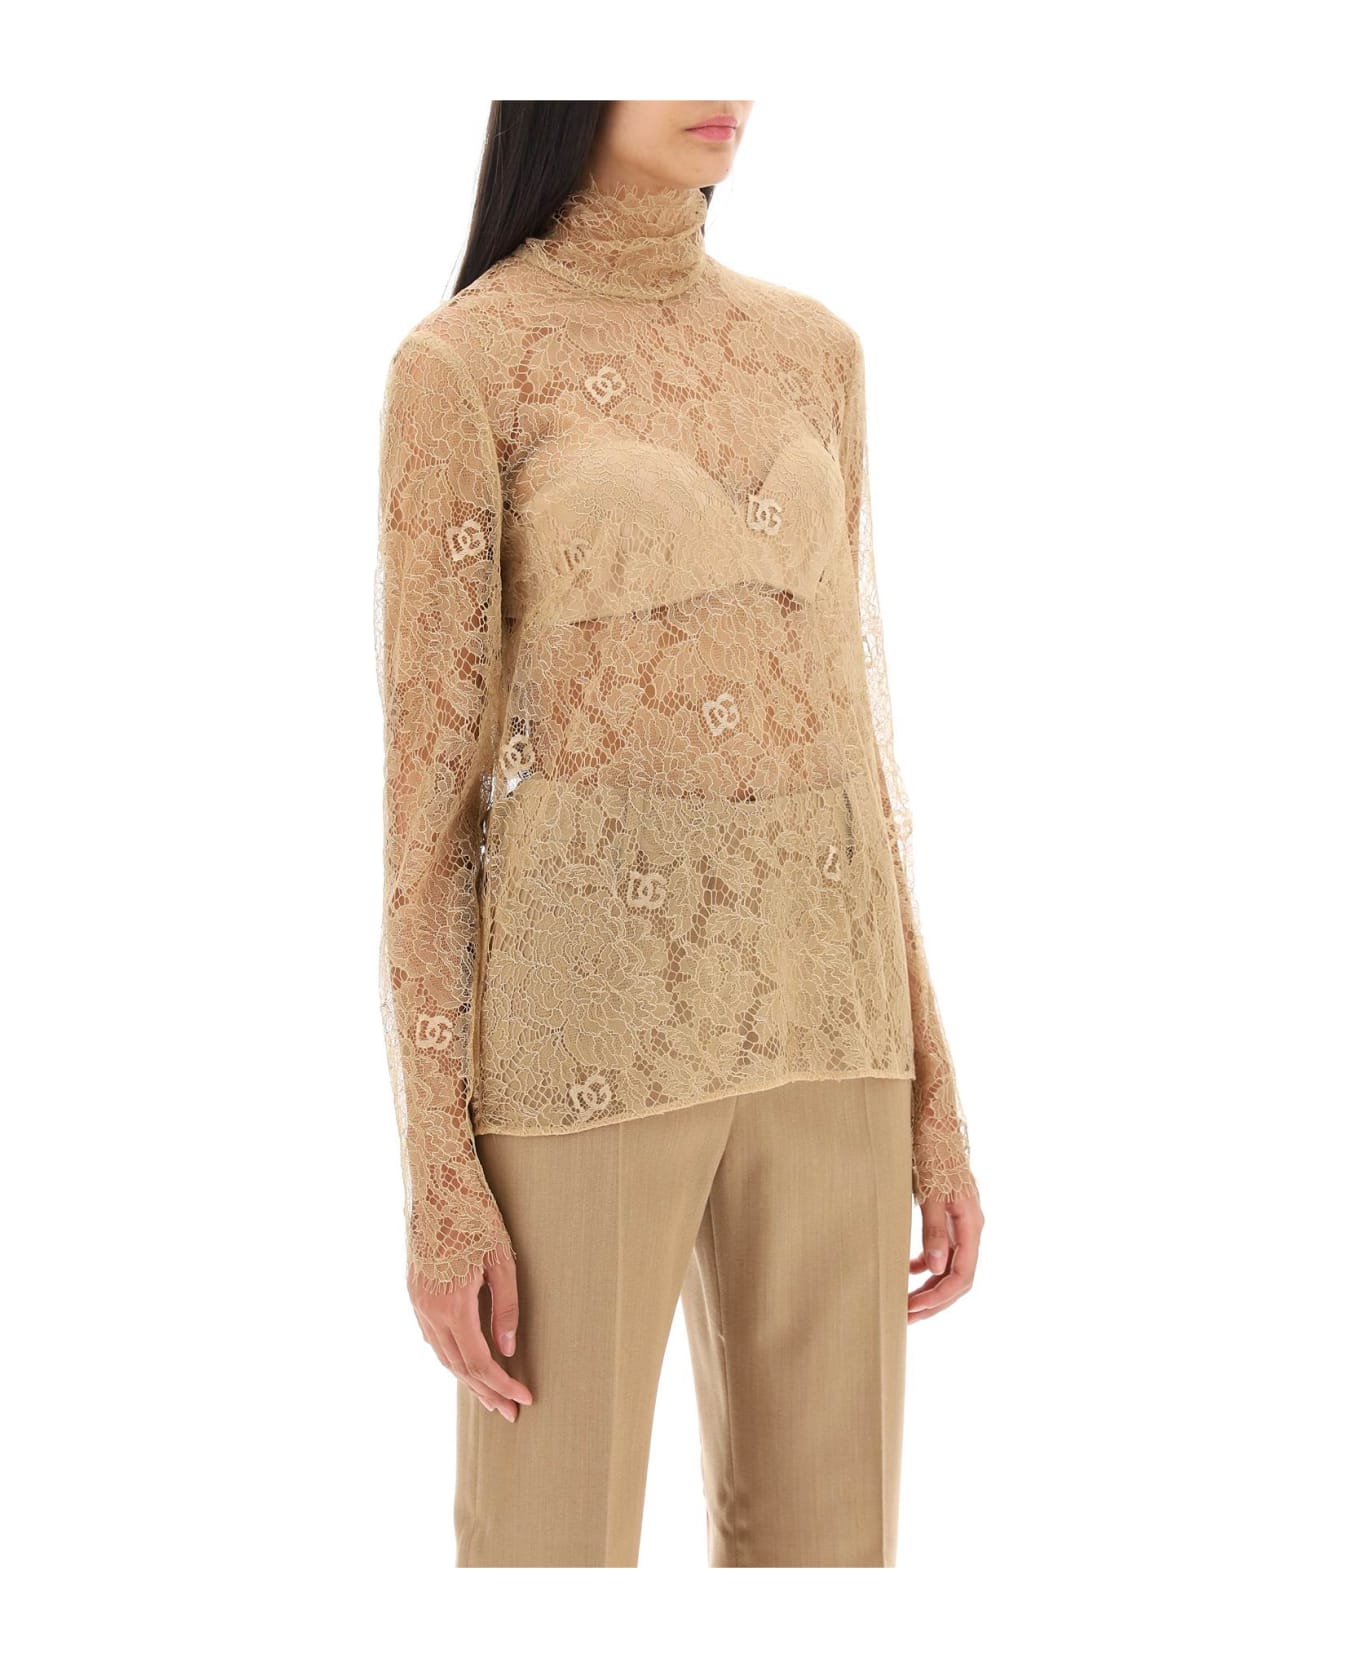 Dolce & Gabbana Blouse In Logoed Floral Lace - Beige